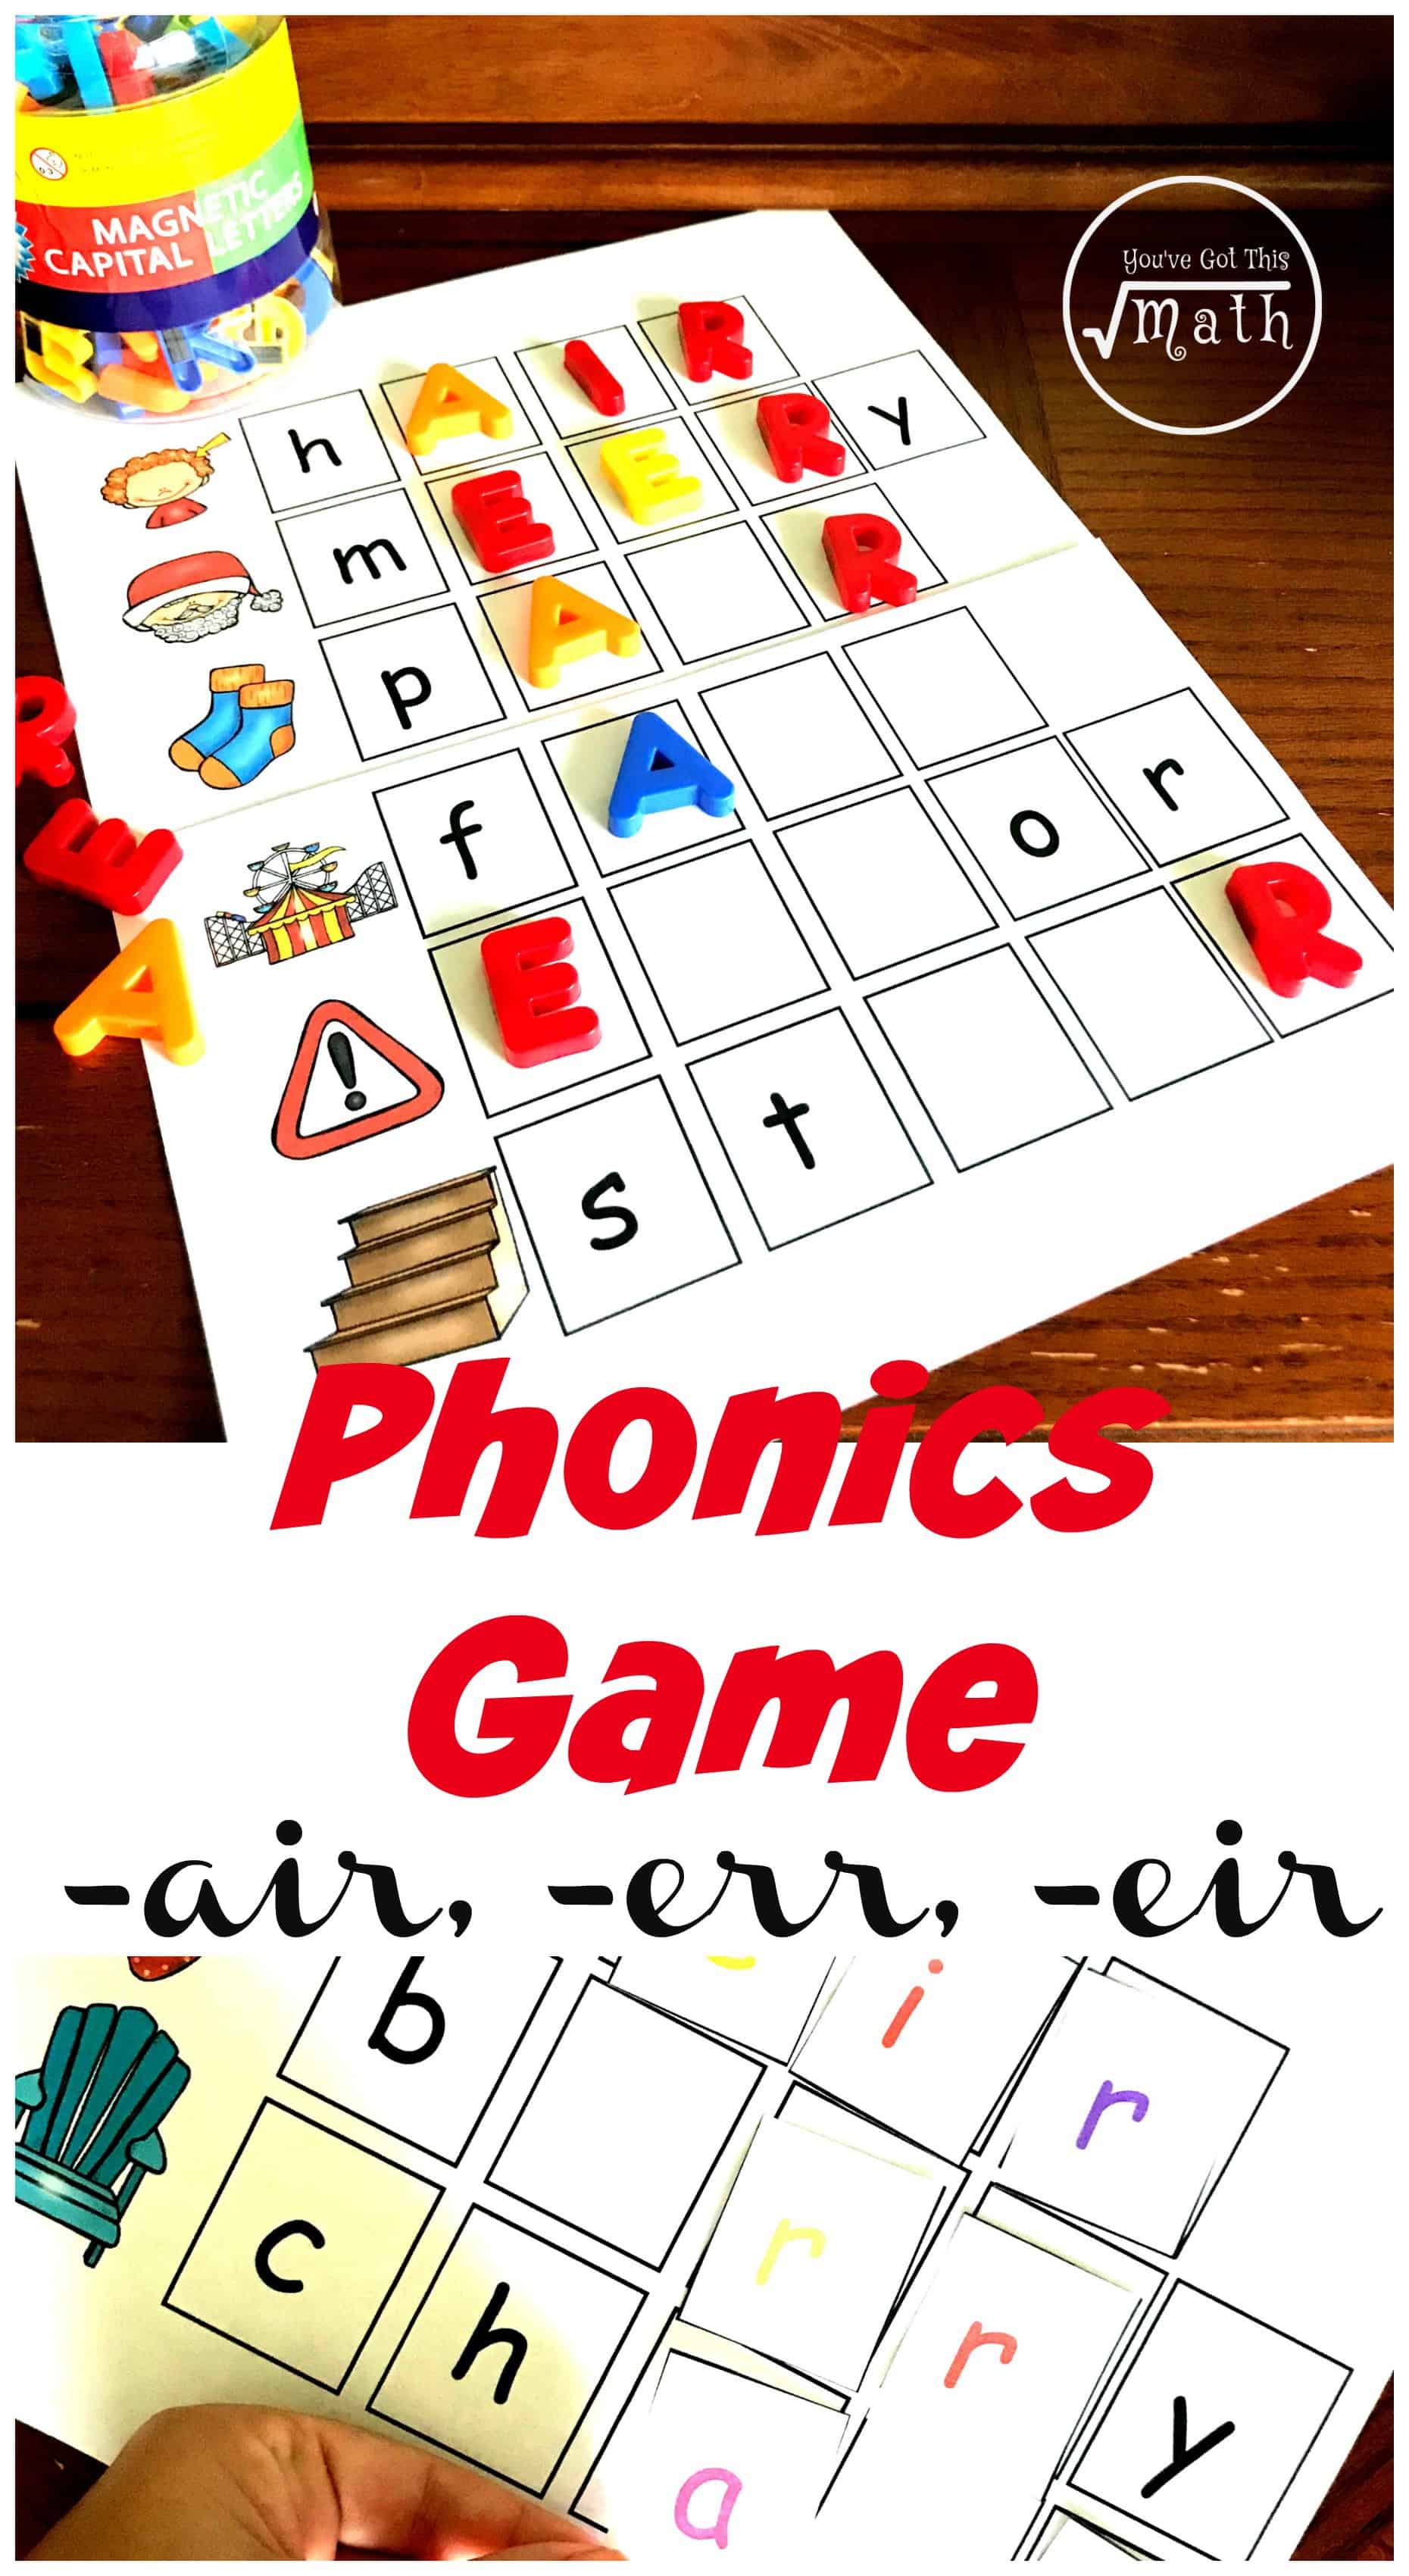 Are you working on air phonics skills? This game helps children build err, eir and air words in this fun fill in the blank activity.